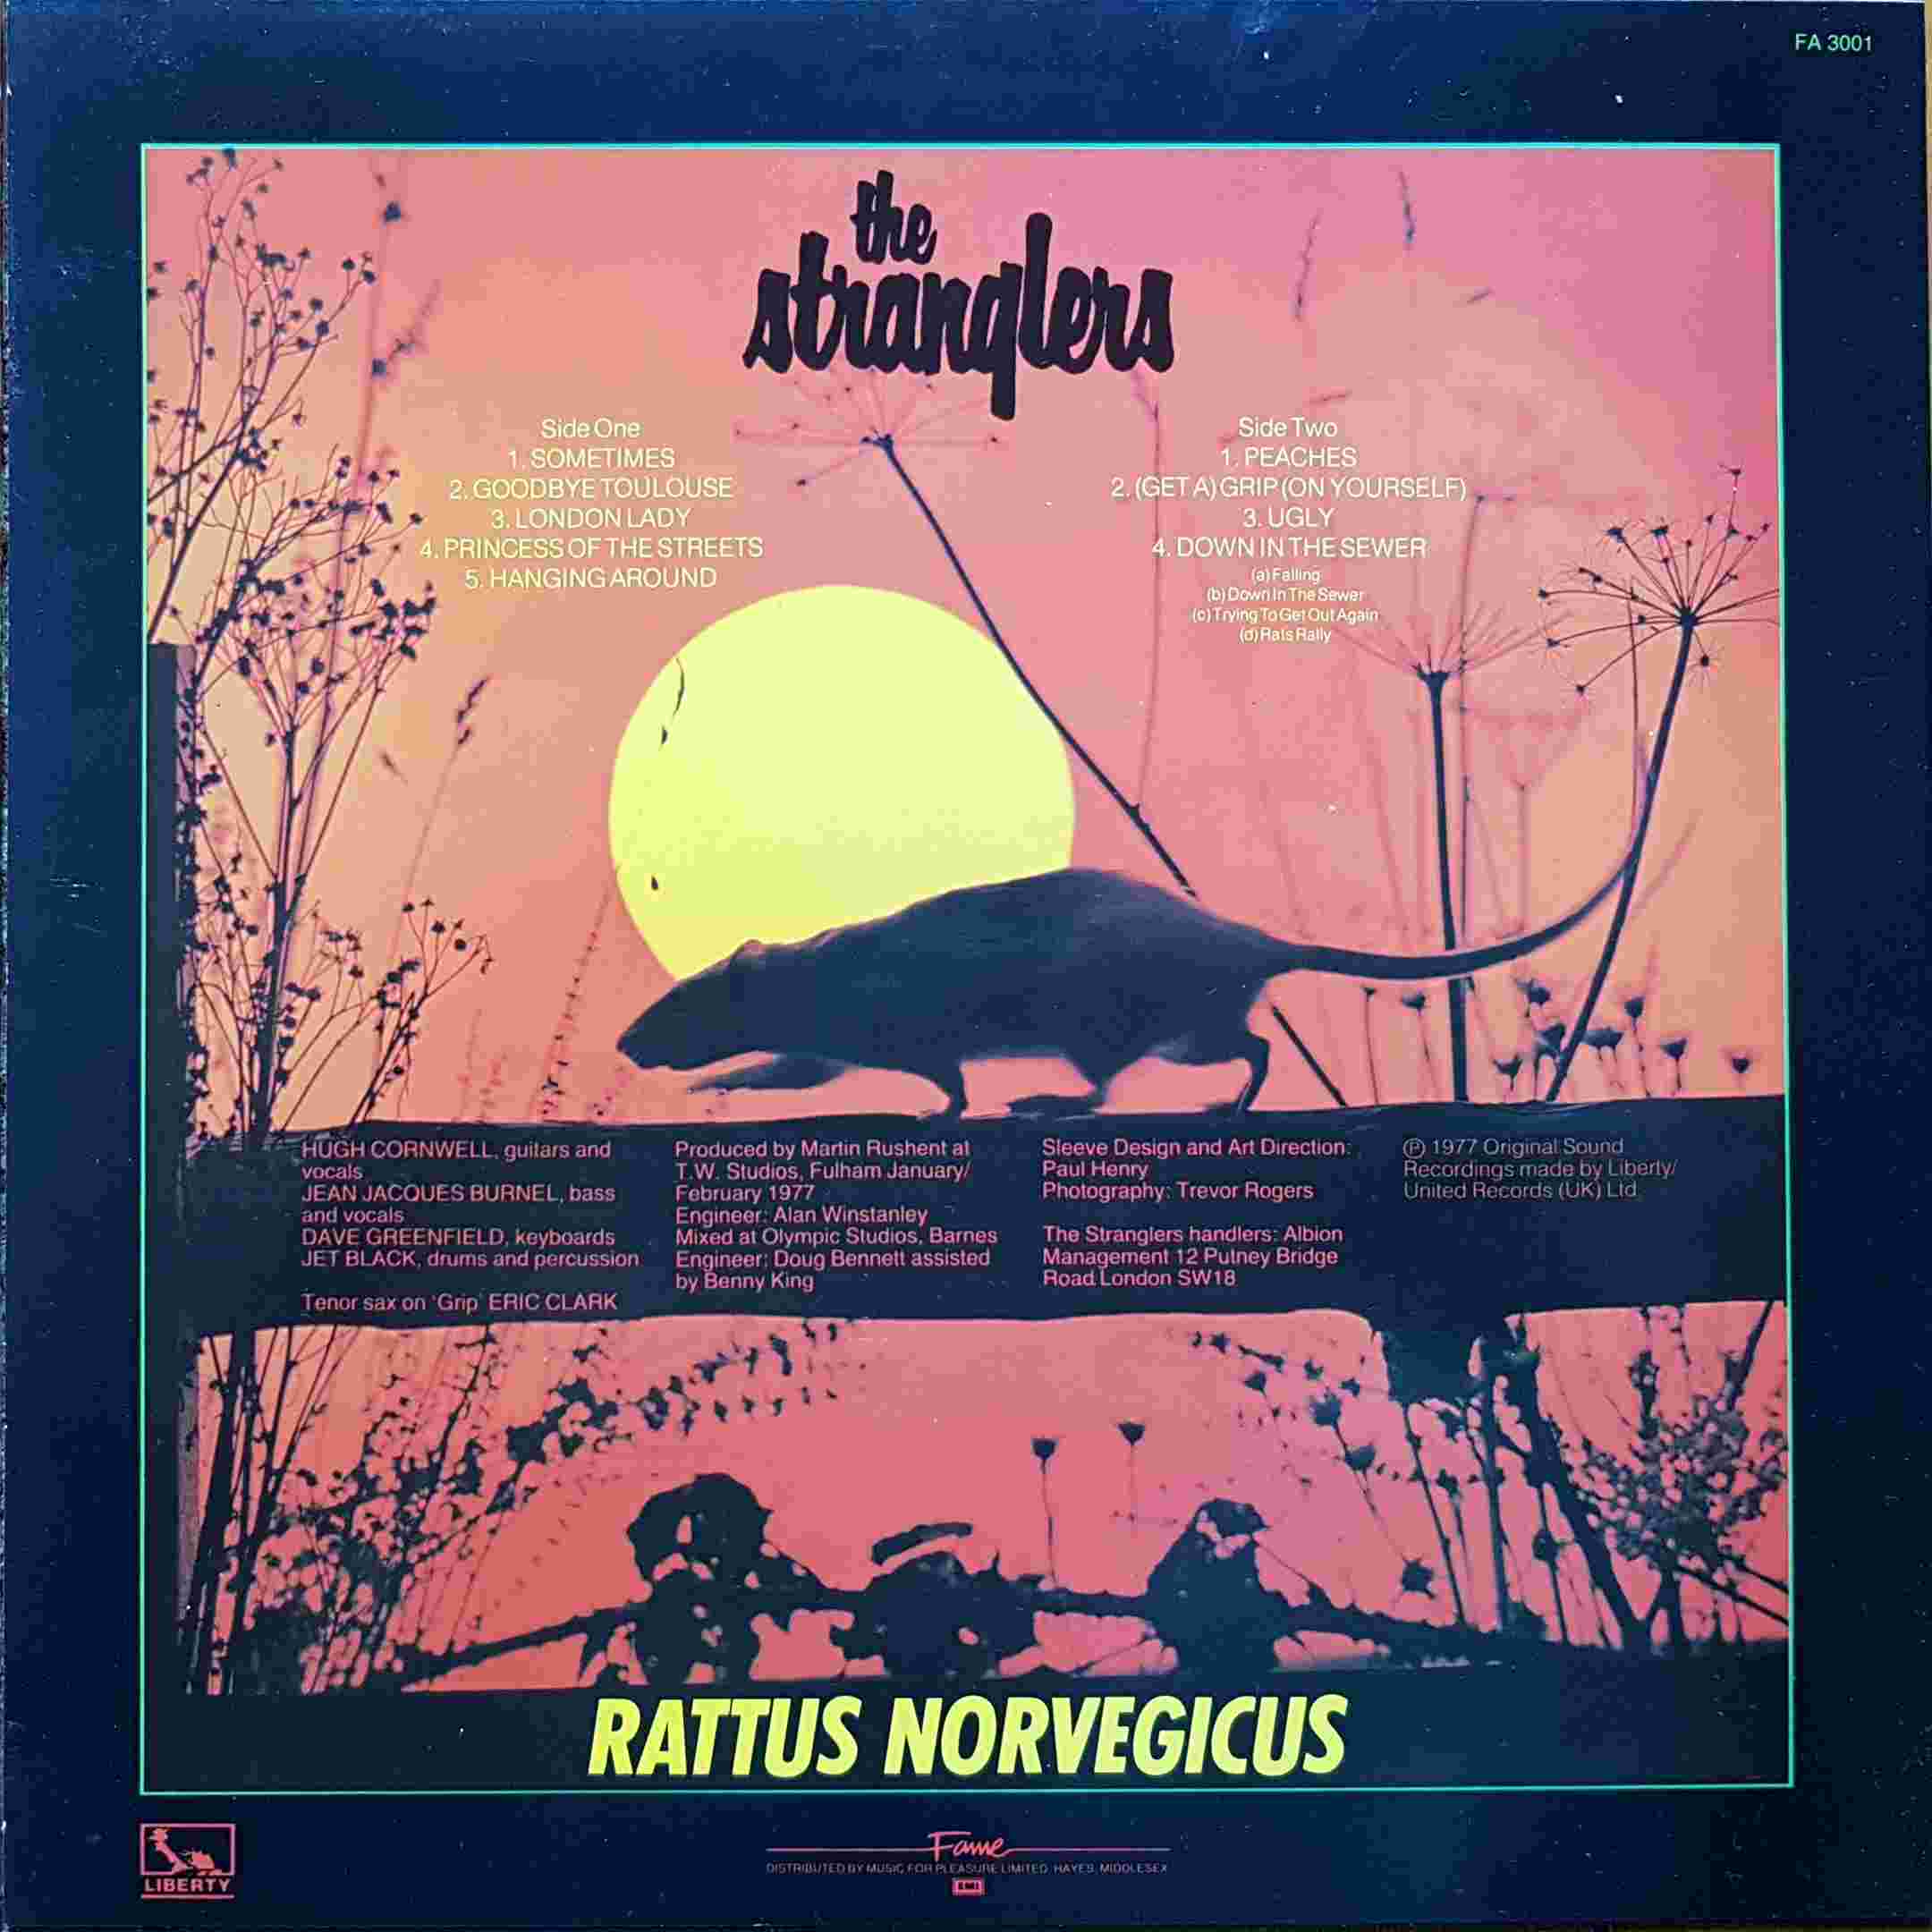 Picture of FA 3001 Rattus norvegicus by artist The Stranglers  from The Stranglers